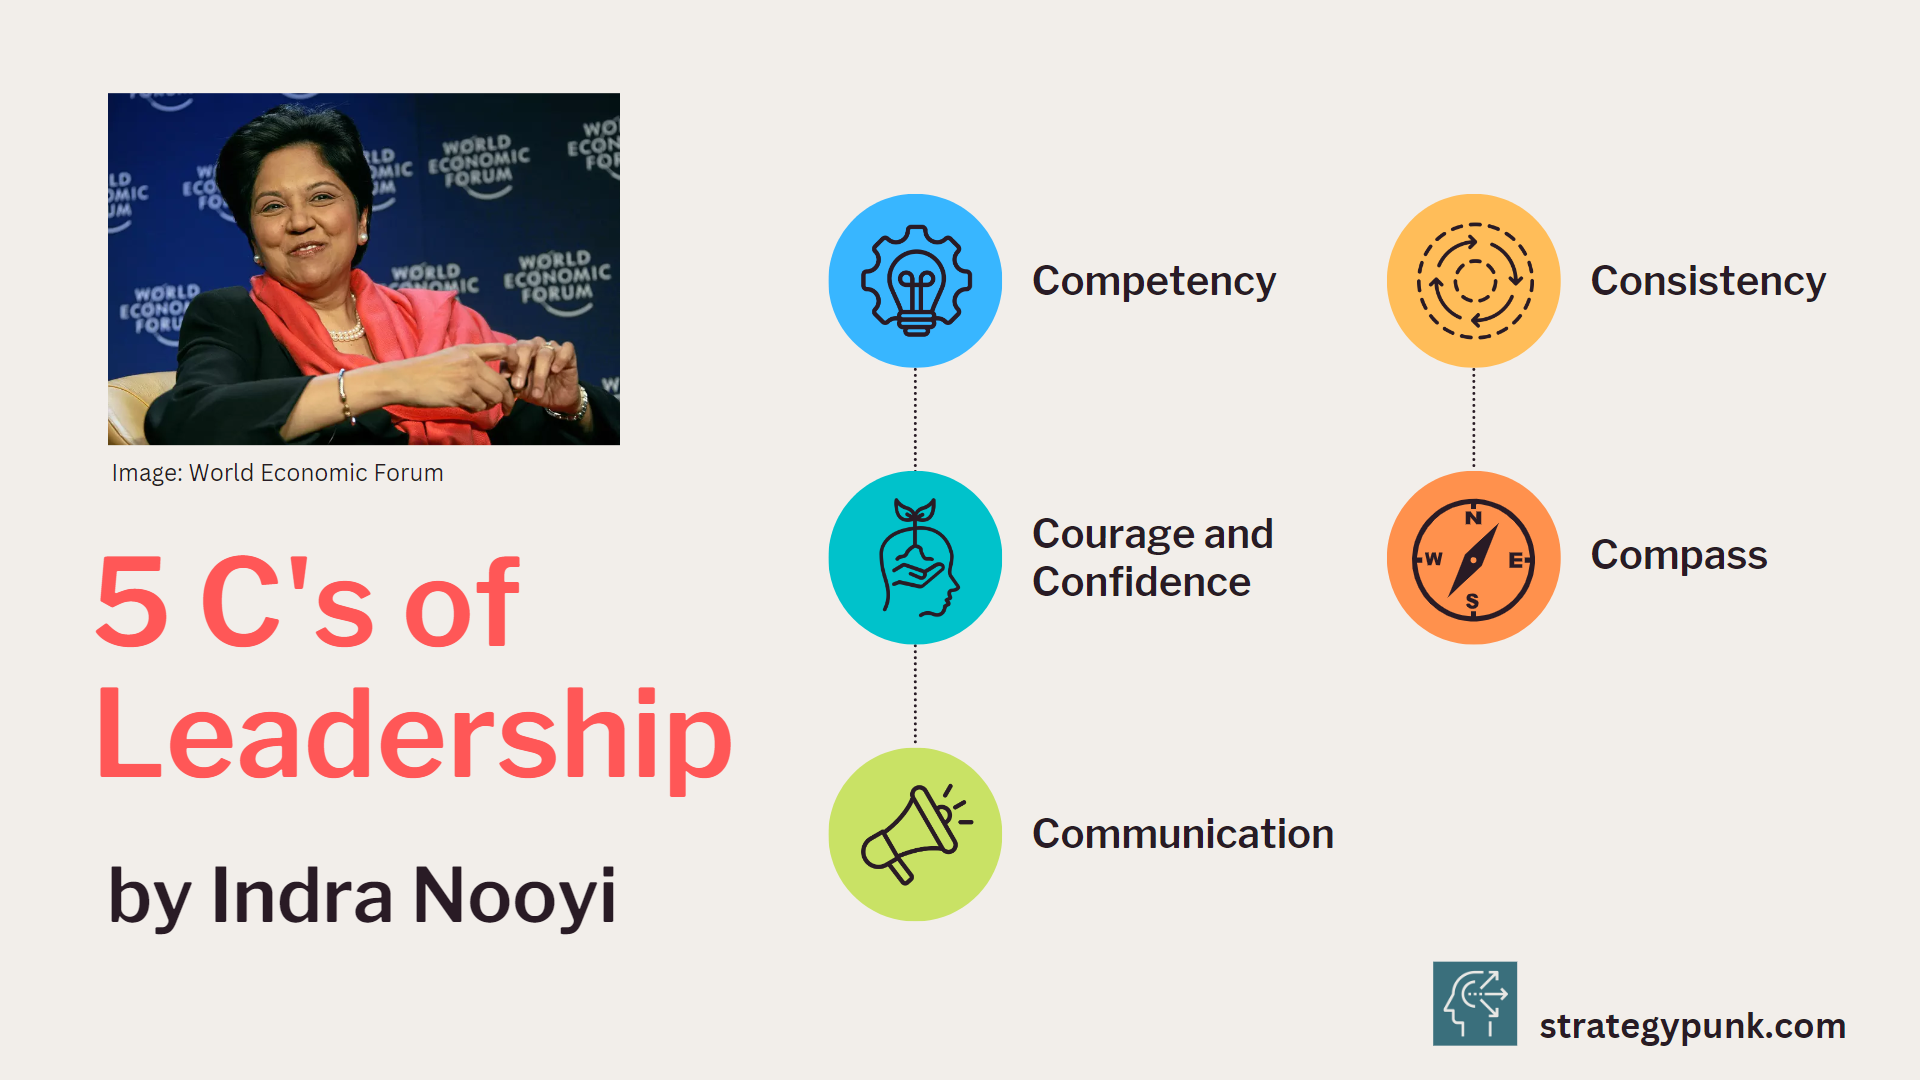 5 C's of Leadership by Indra Nooyi